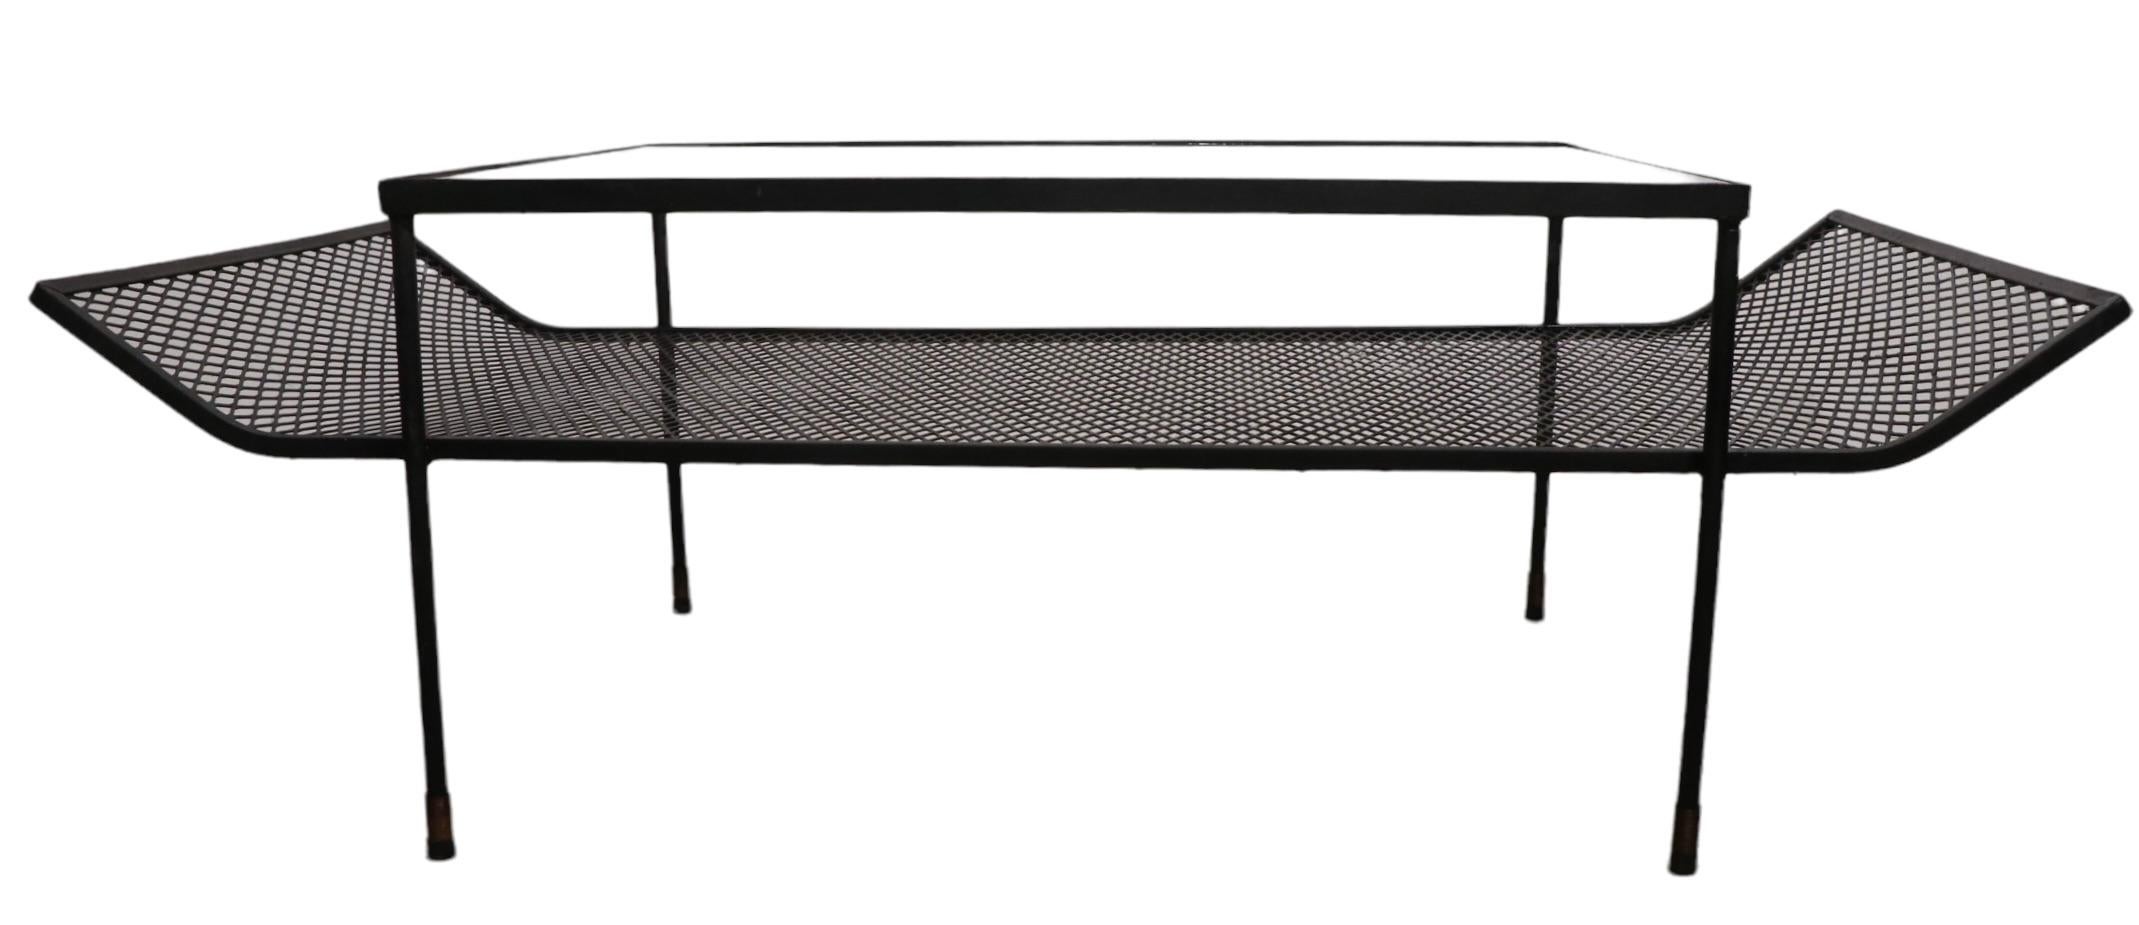  Architectural Mid-Century Wrought Iron and Glass Coffee Table Att. to Woodard  For Sale 2